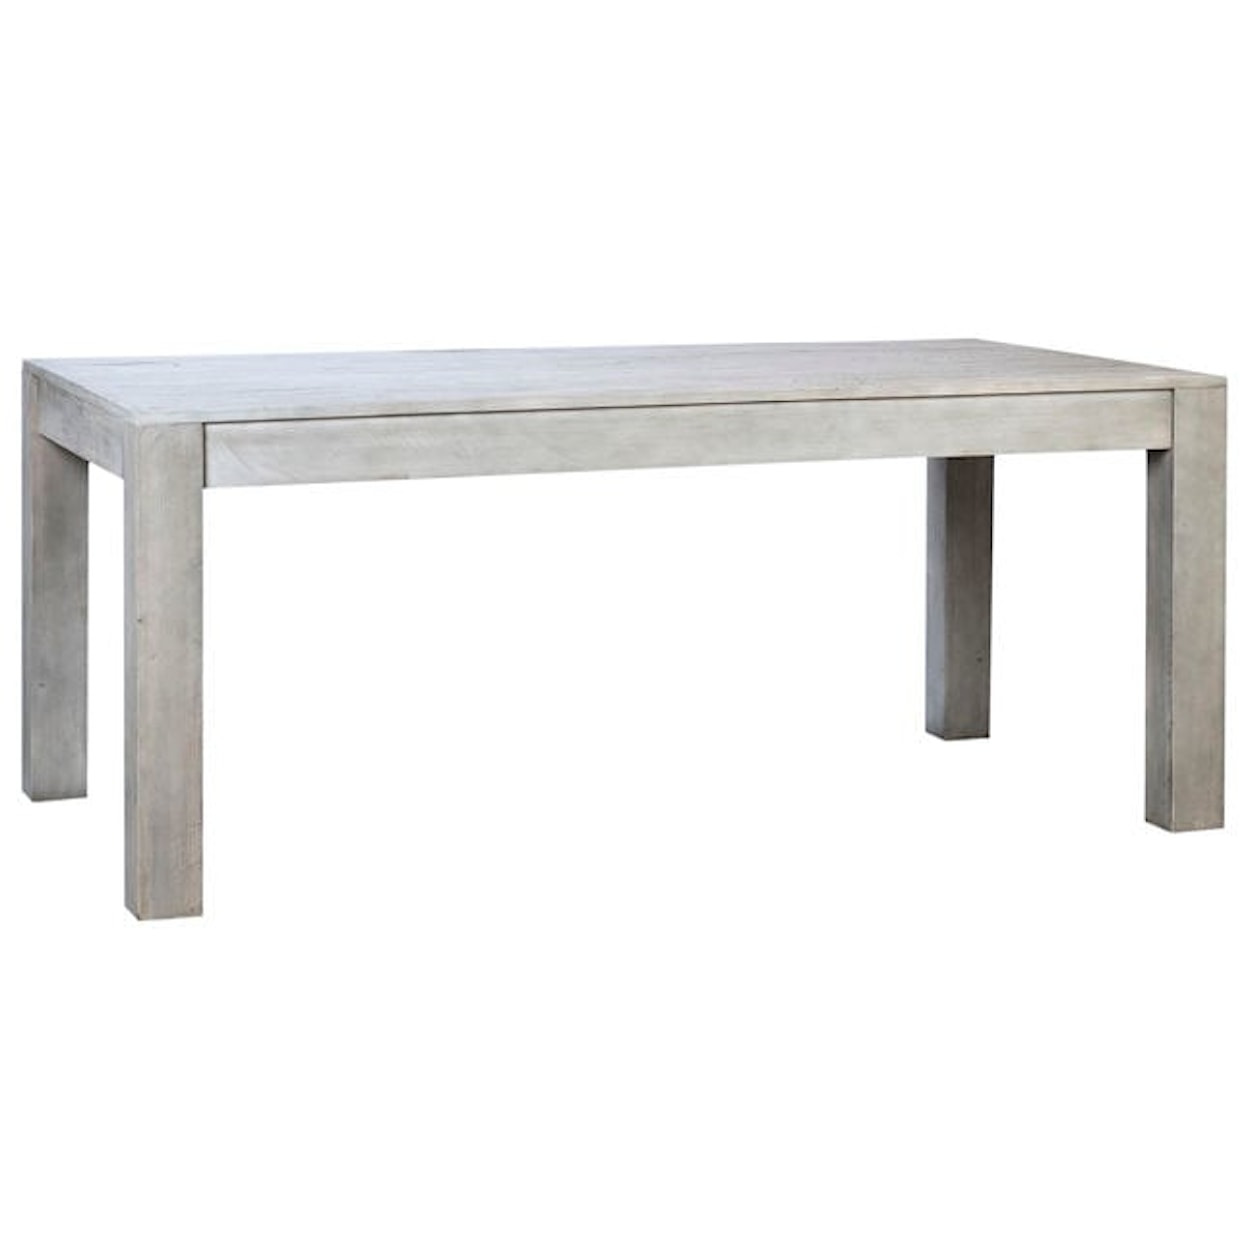 Dovetail Furniture Clancy Clancy Miranda Dining Table